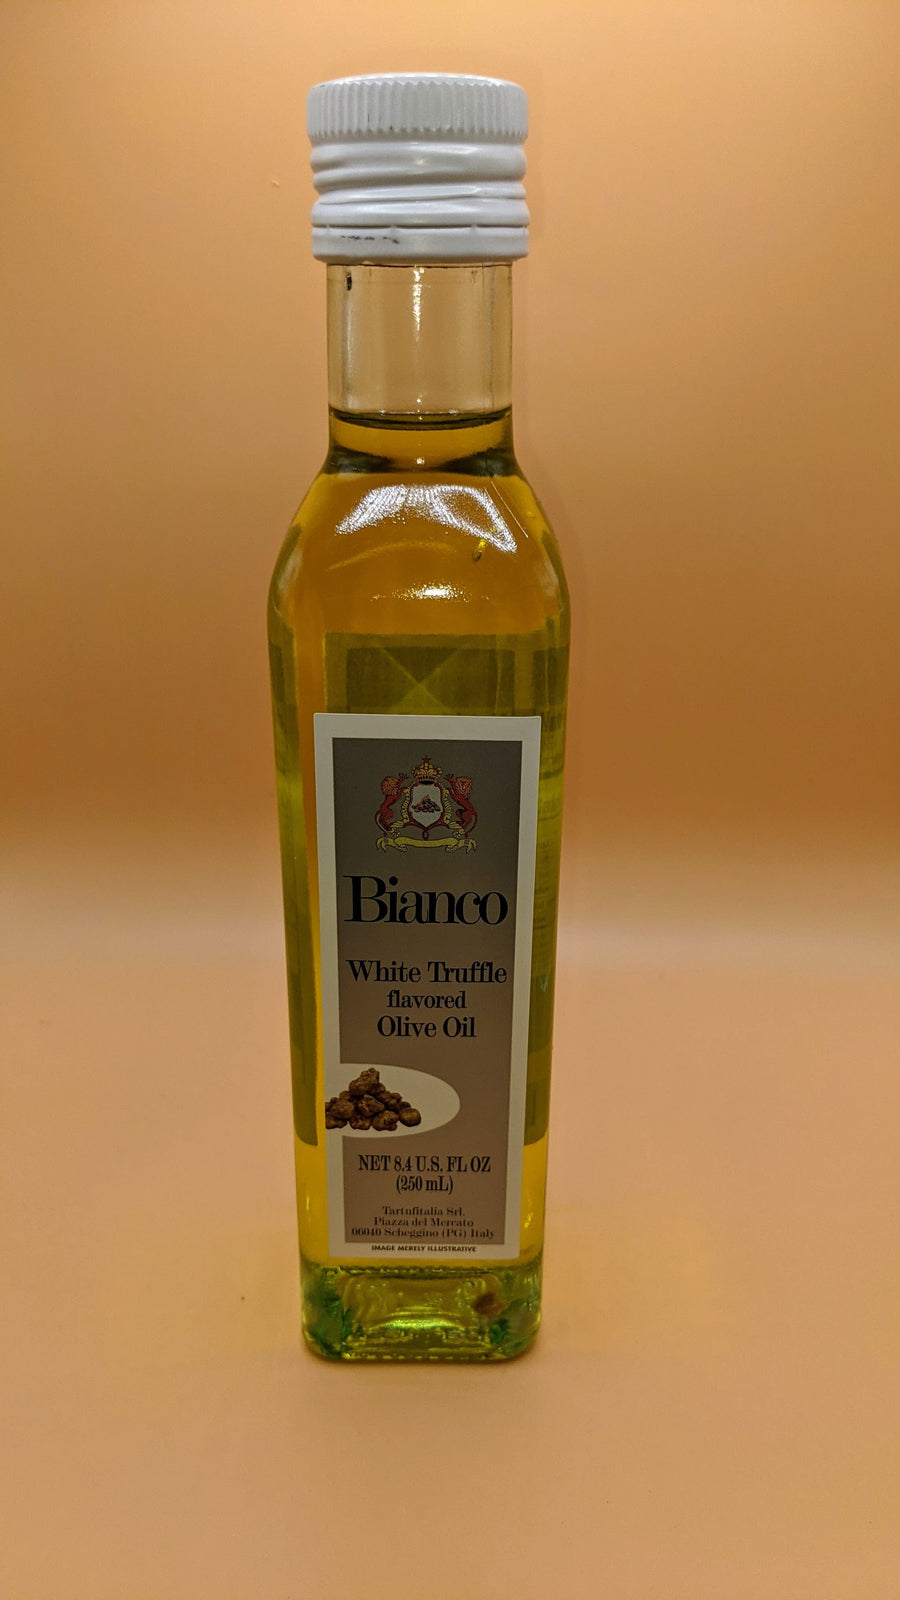 Bottle-of-Bianco-Olive-Oil-White-truffle-8.4-oz-real-gourmet-food-foodie